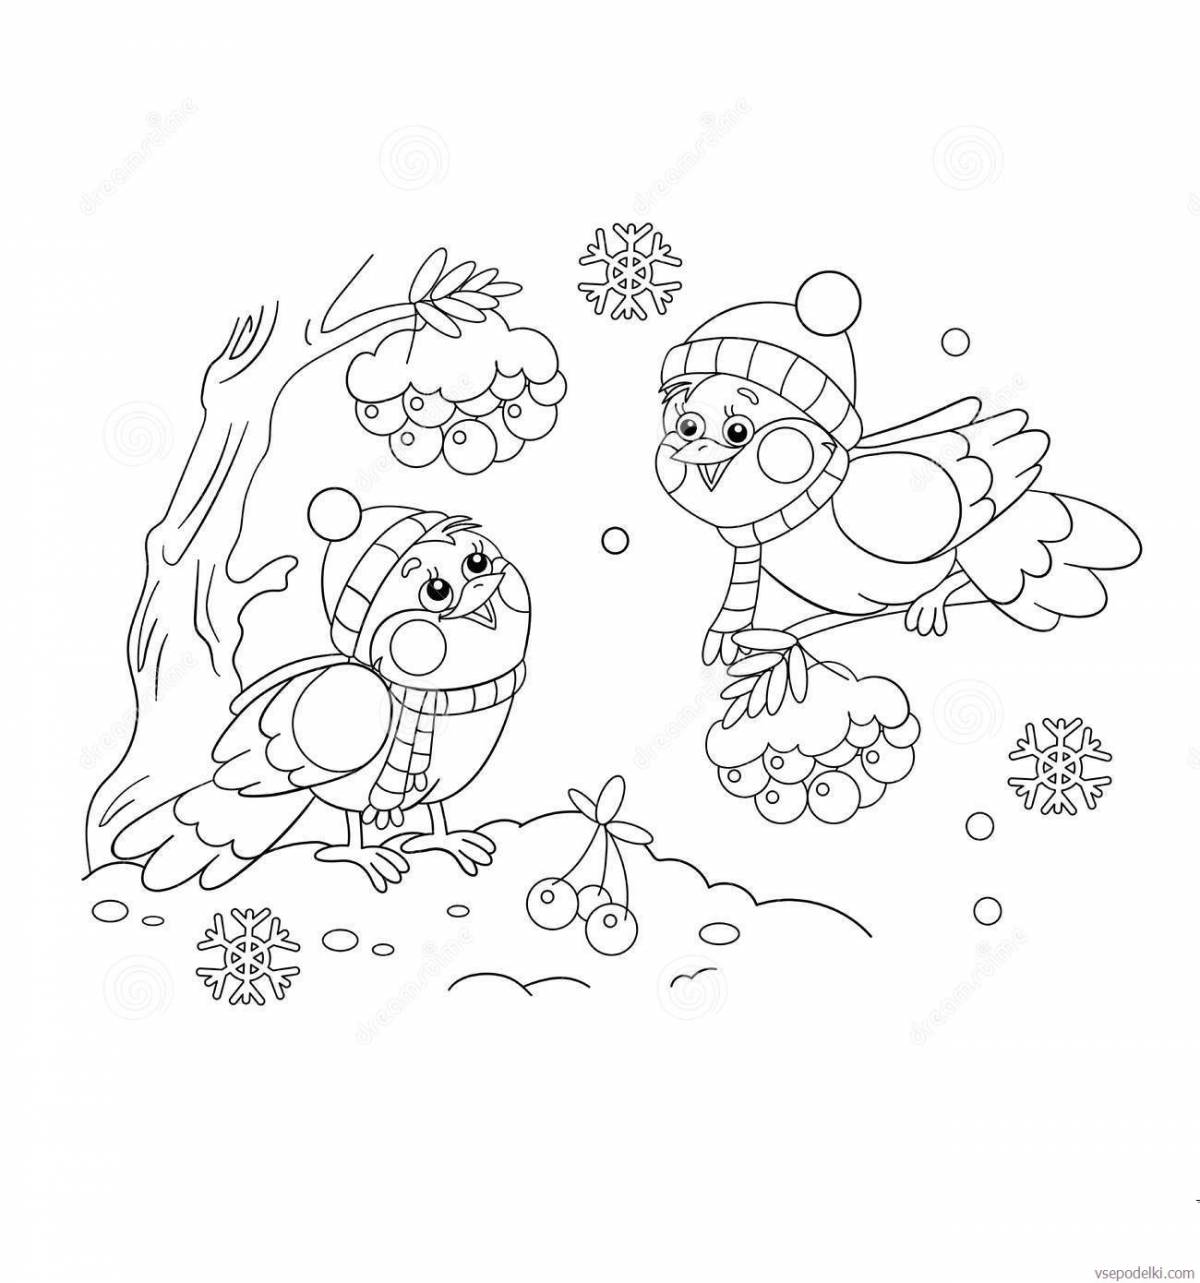 Coloring page dazzling christmas bird